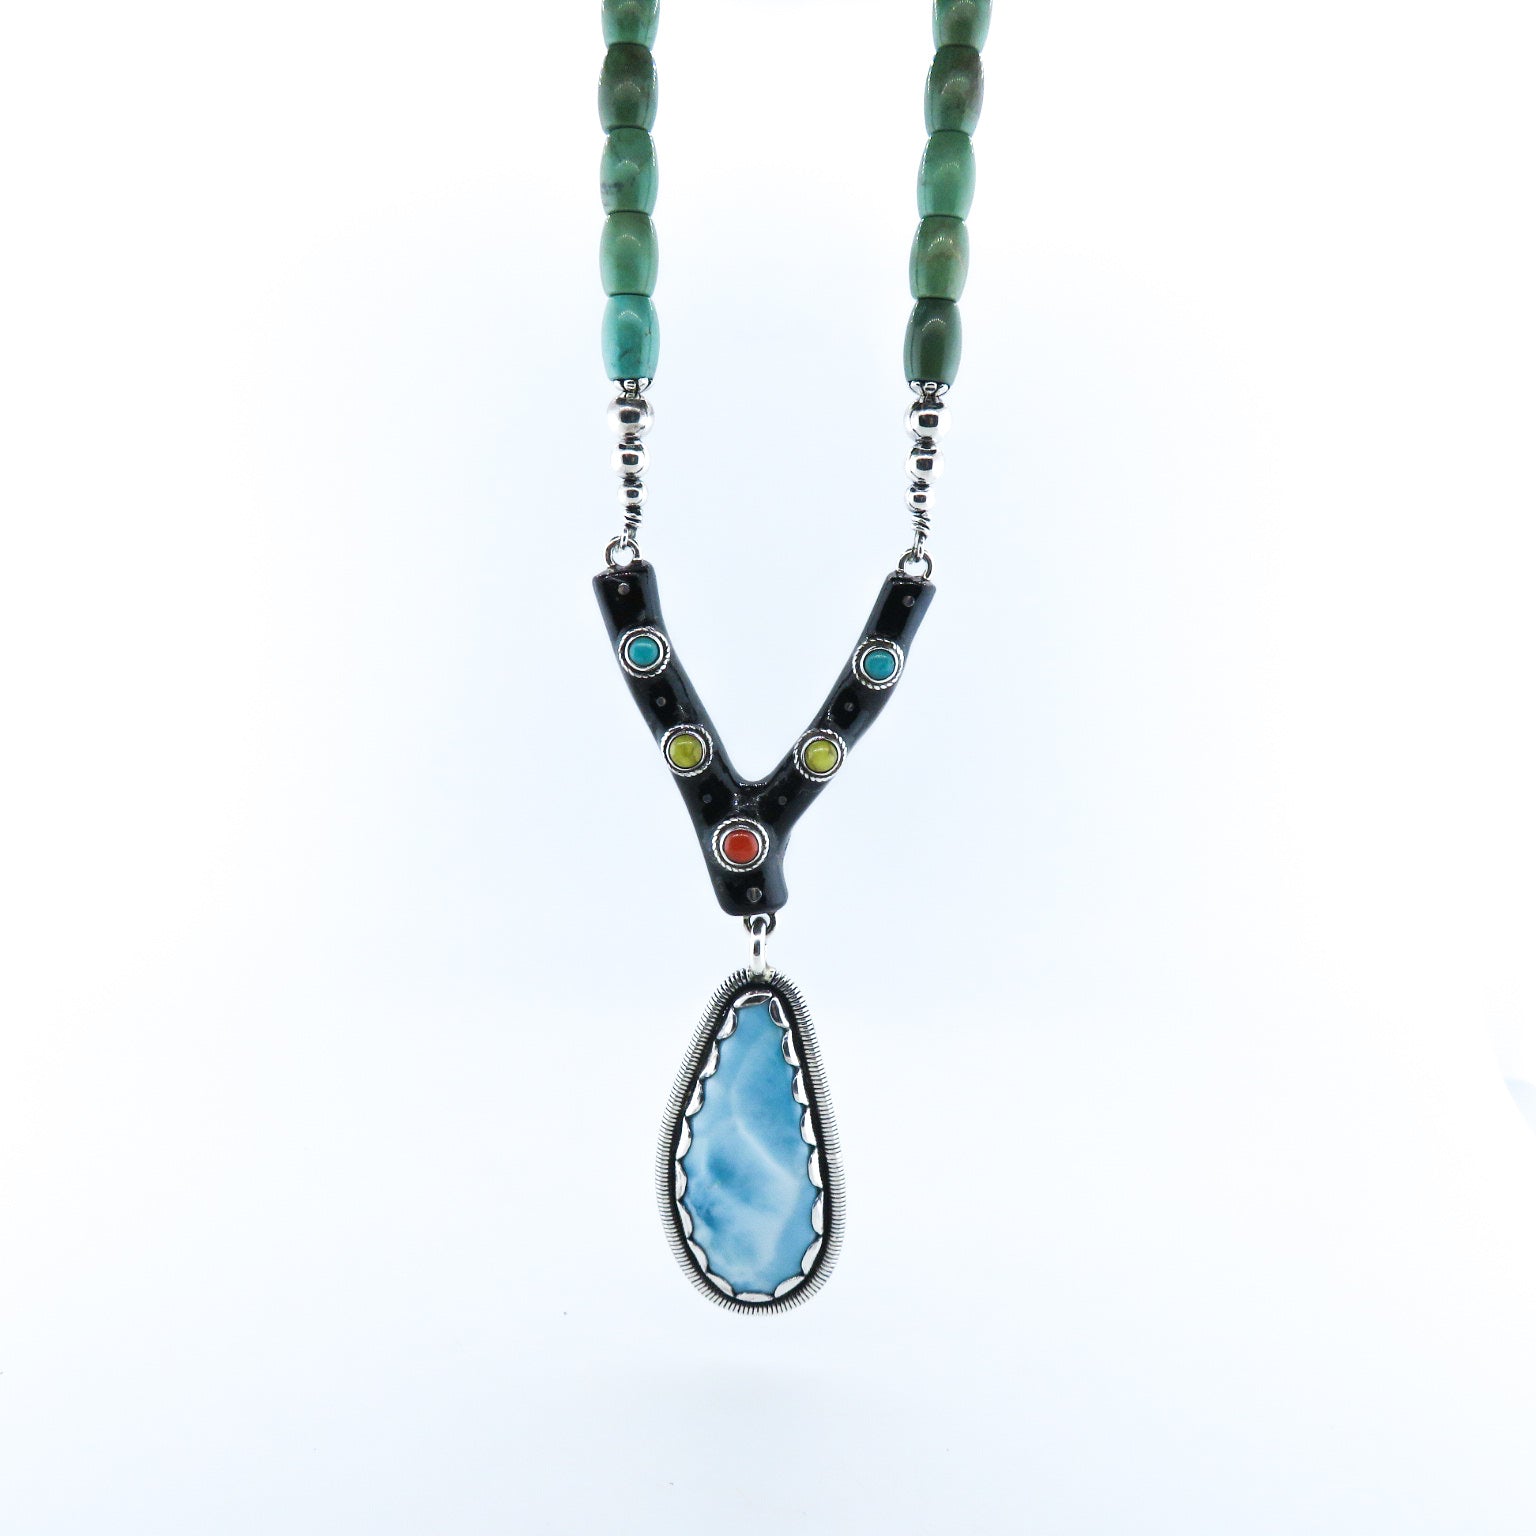 Larimar Stone Necklace with Black Coral, Turquoise, Red Coral, Lapis Lazuli, Aquamarine, Jade and Silver Beads